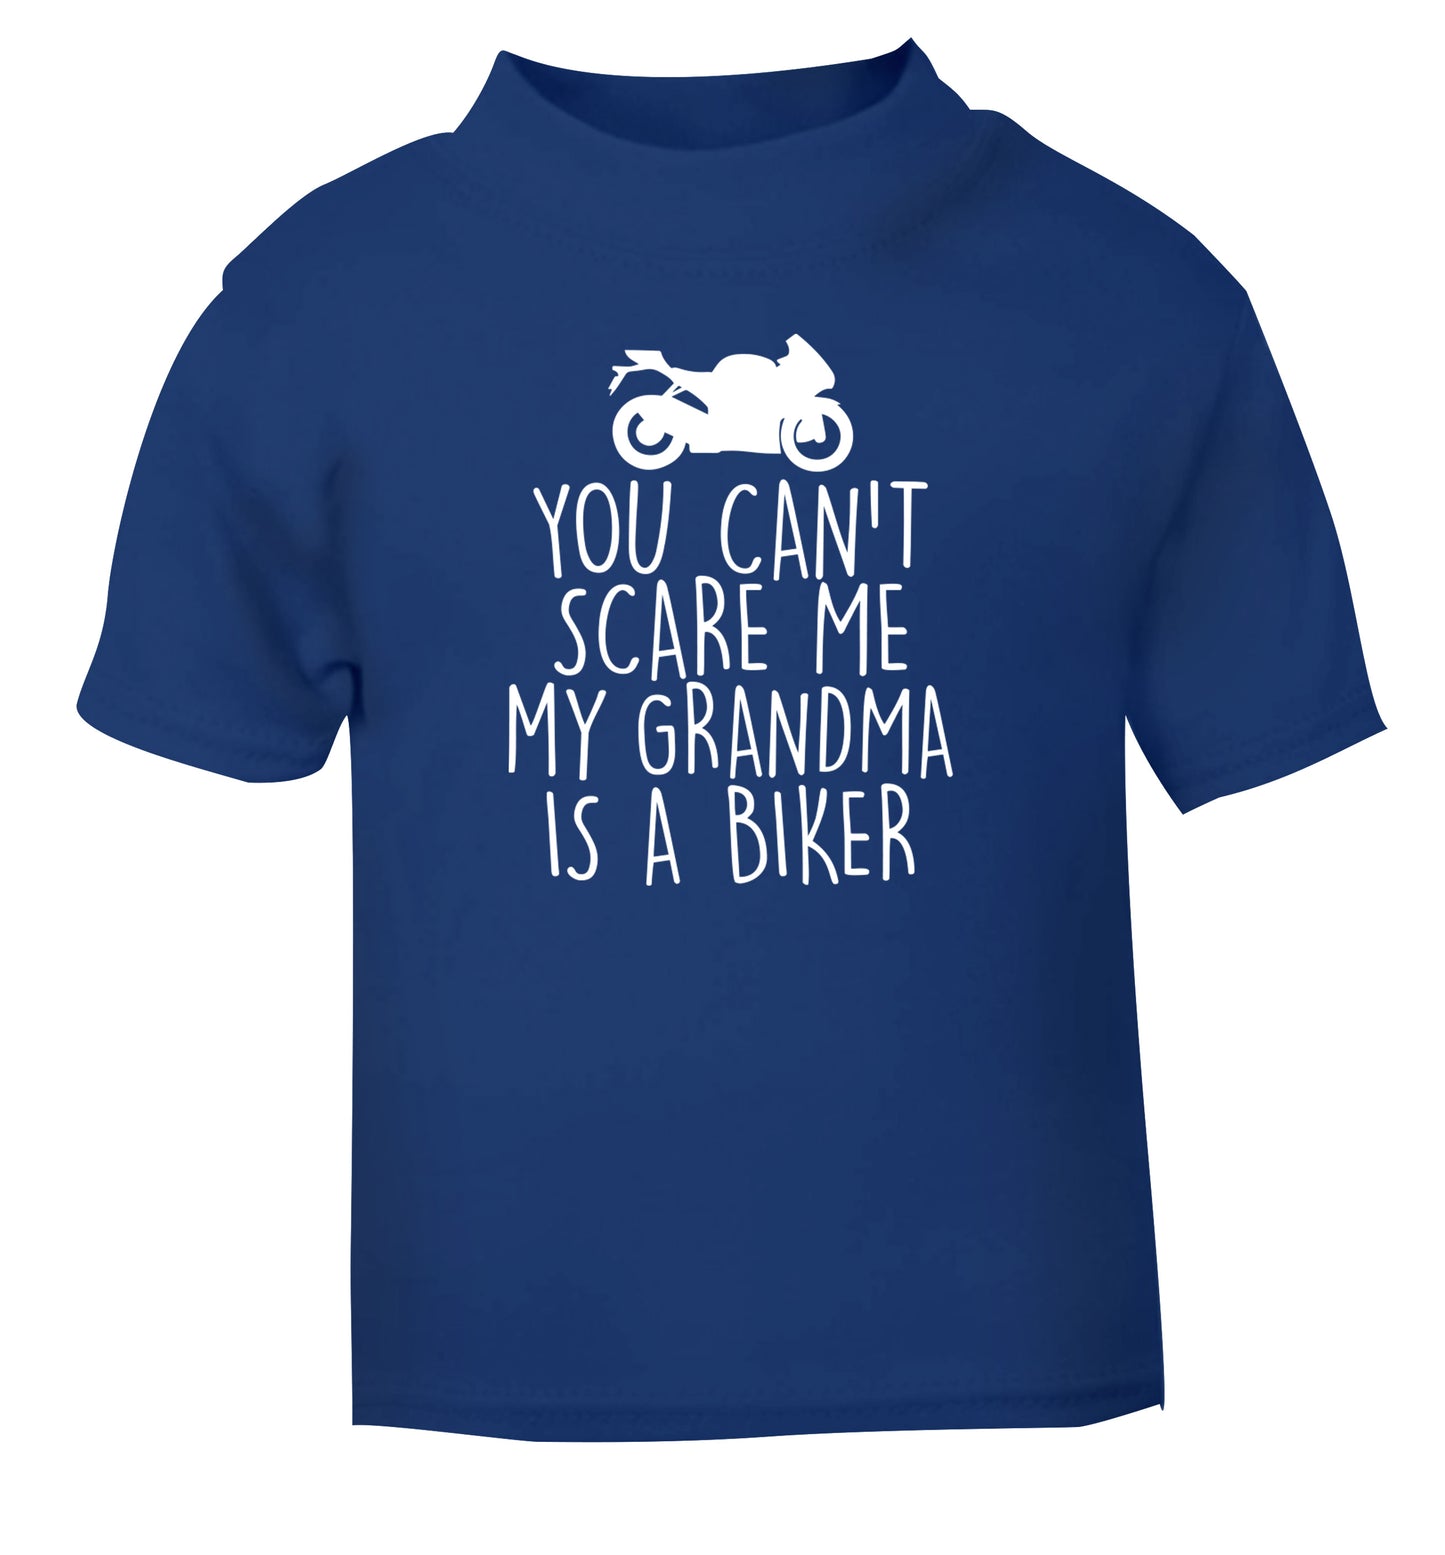 You can't scare me my grandma is a biker blue Baby Toddler Tshirt 2 Years